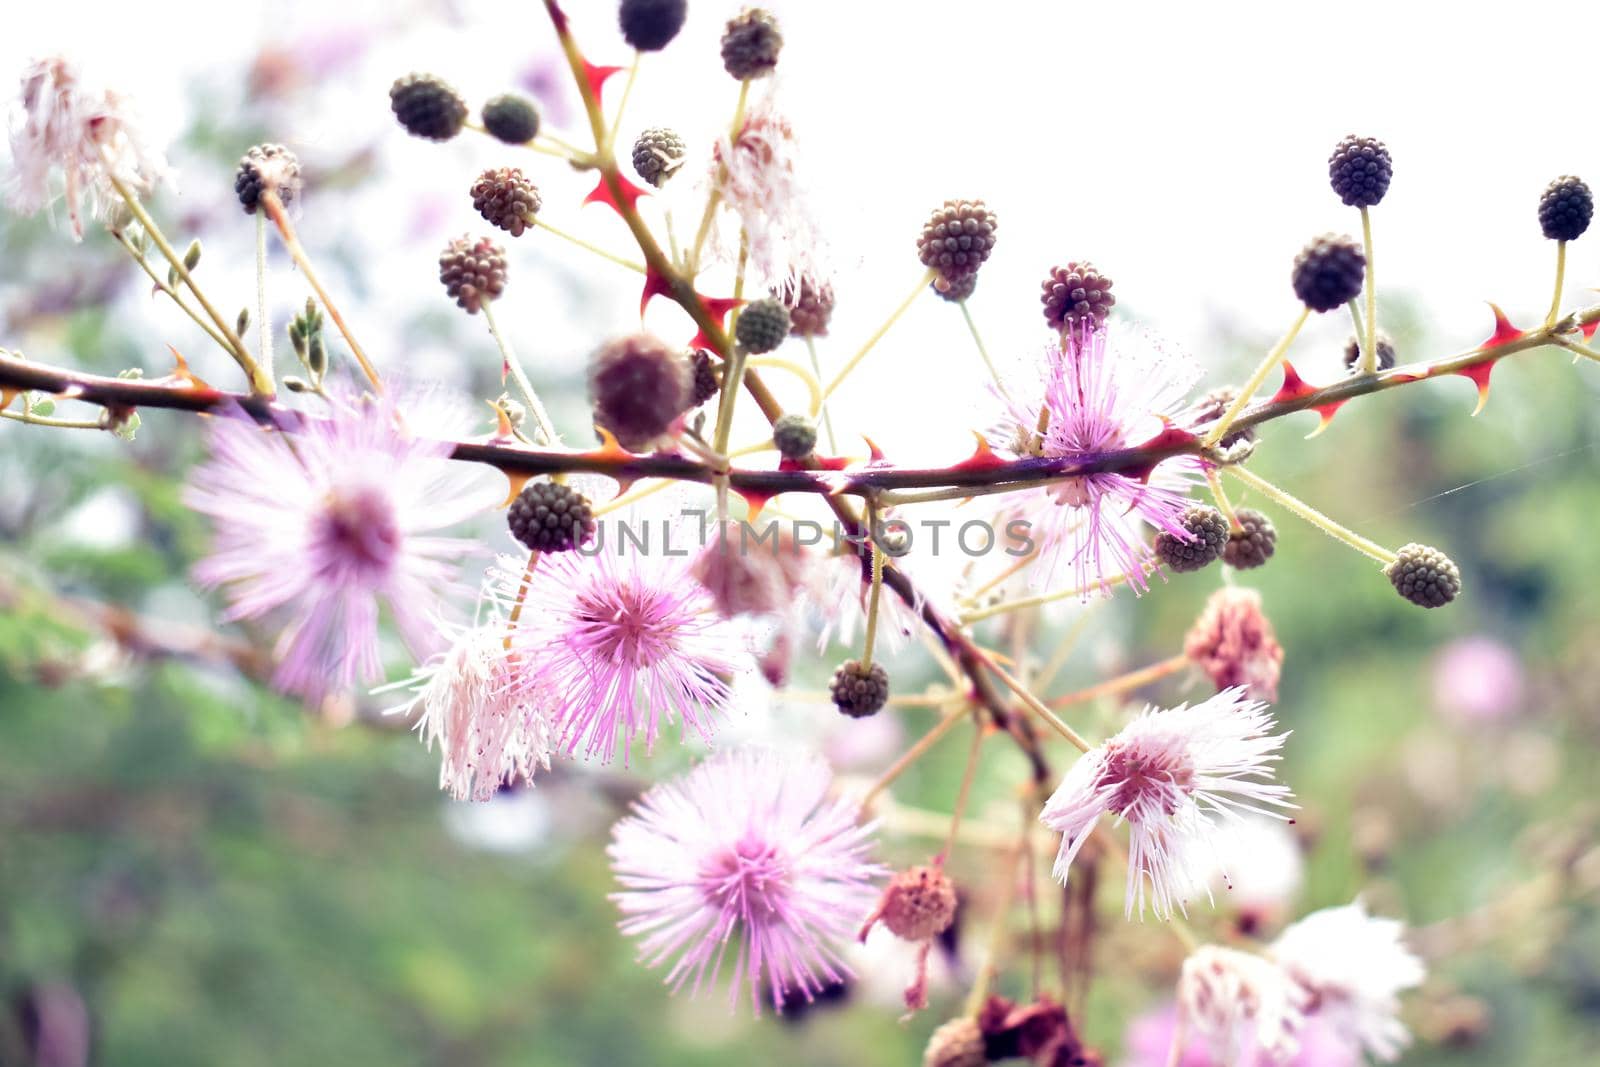 Wildflowers with pink fluffy petals on a blurred nature background by tabishere